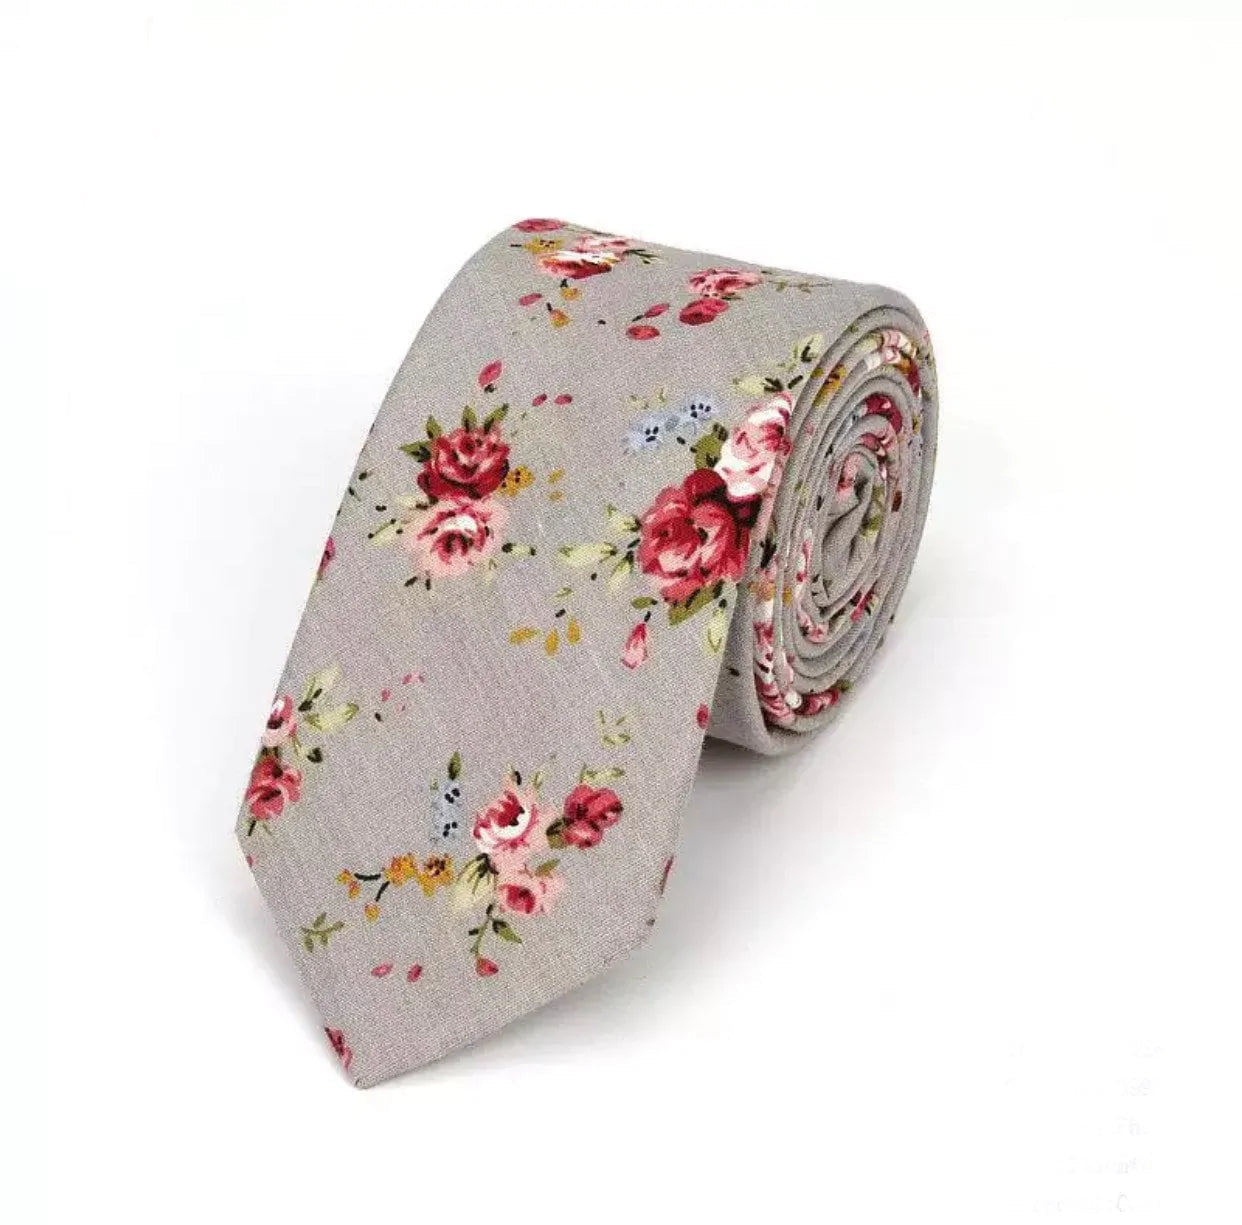 Gray Floral Skinny Tie BANE MYTIESHOP-Neckties-Gray Floral Skinny Tie Gray Floral tie for wedding events. Gray and red floral print tie, skinny ties. Neckties for men. Cool ties gray and red bane-Mytieshop. Skinny ties for weddings anniversaries. Father of bride. Groomsmen. Cool skinny neckties for men. Neckwear for prom, missions and fancy events. Gift ideas for men. Anniversaries ideas. Wedding aesthetics. Flower ties. Dry flower ties.